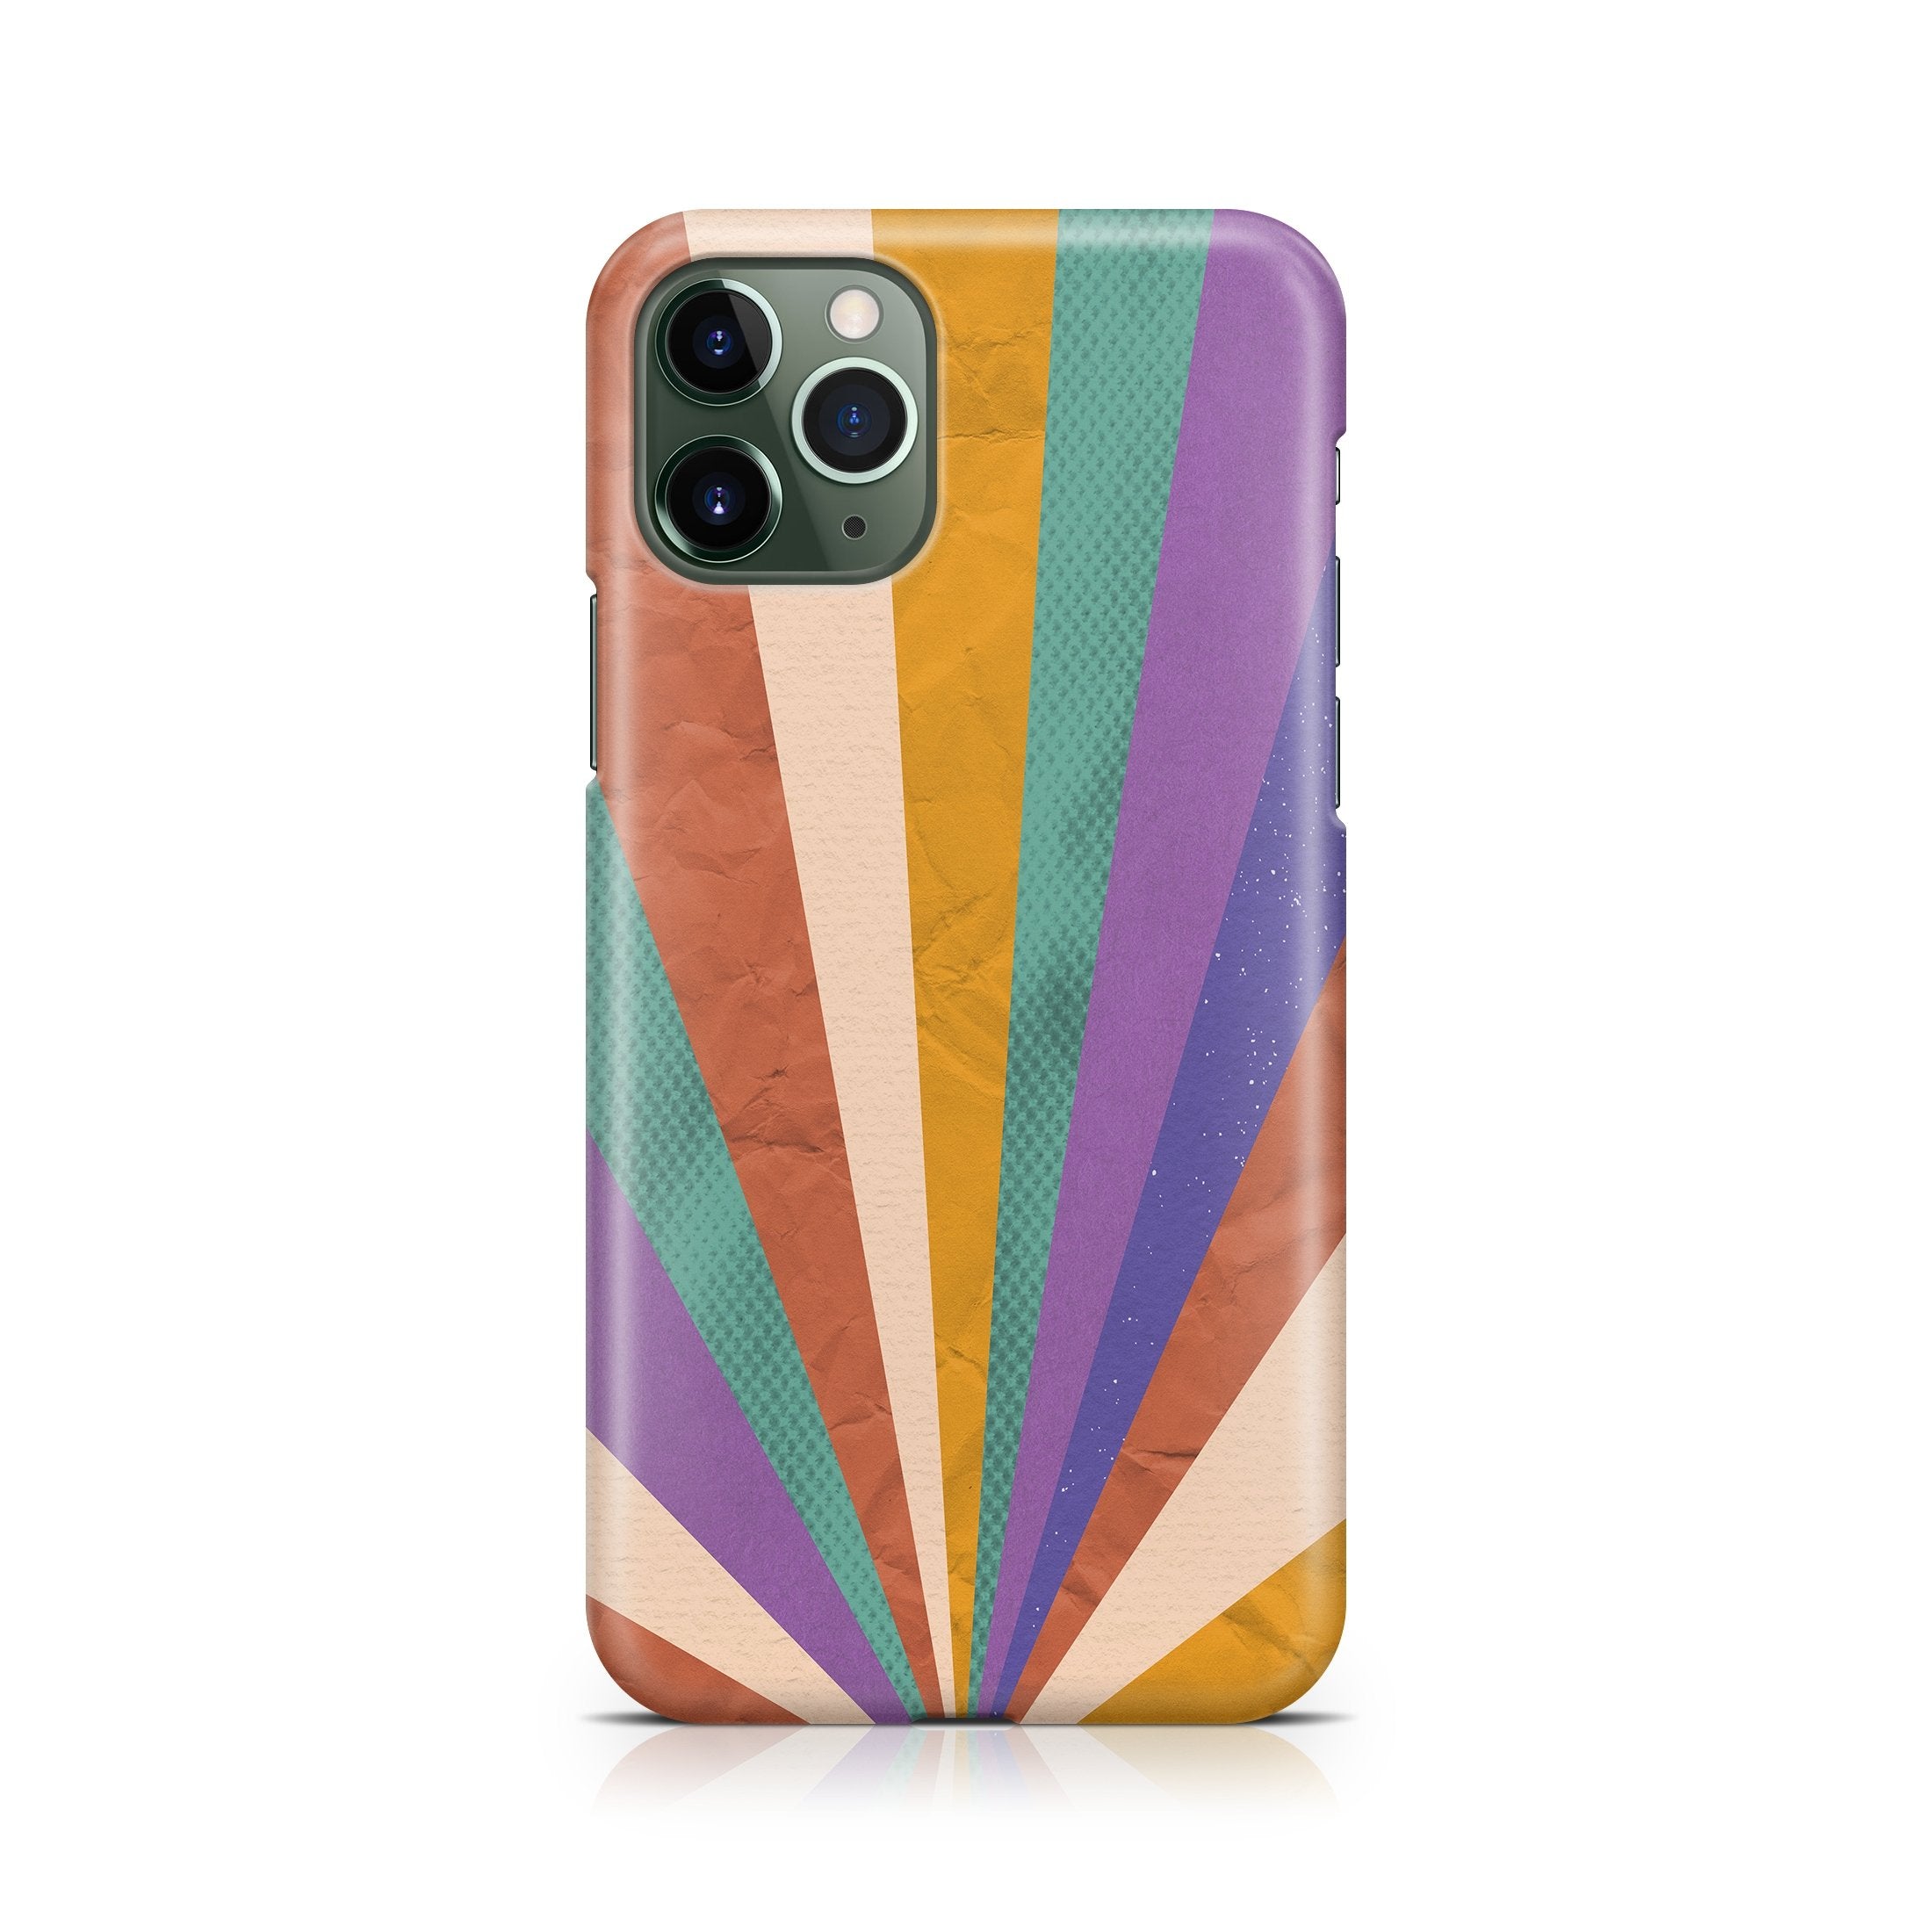 Retro Blast - iPhone phone case designs by CaseSwagger